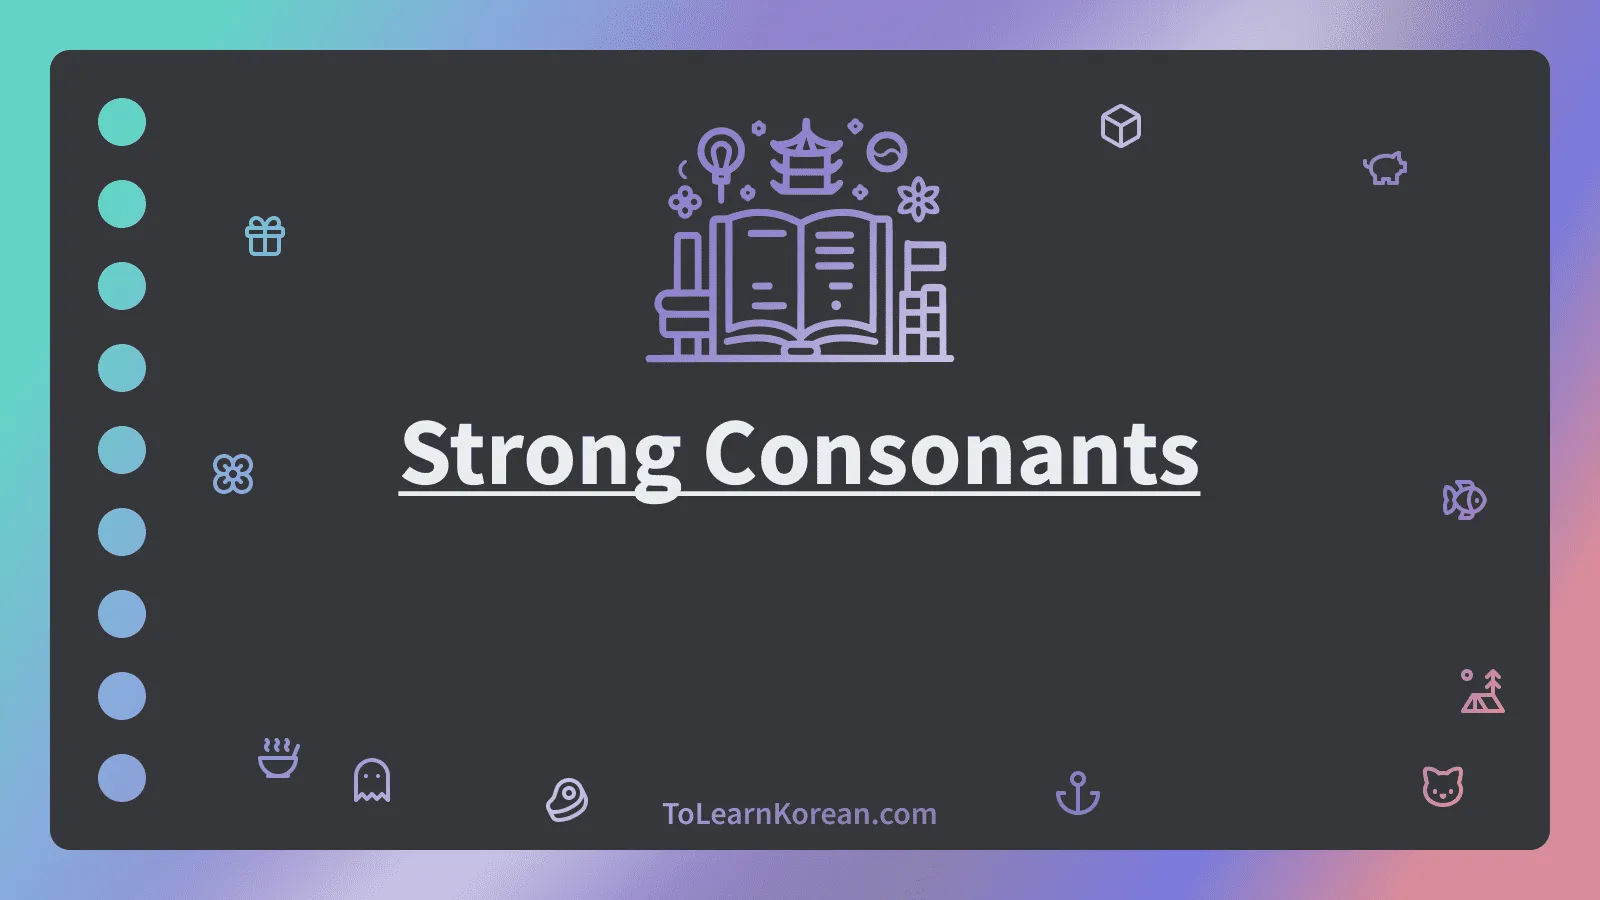 Simple illustration with a gradient background, book icon, and various small icons surrounding the title which is placed prominently in the center.